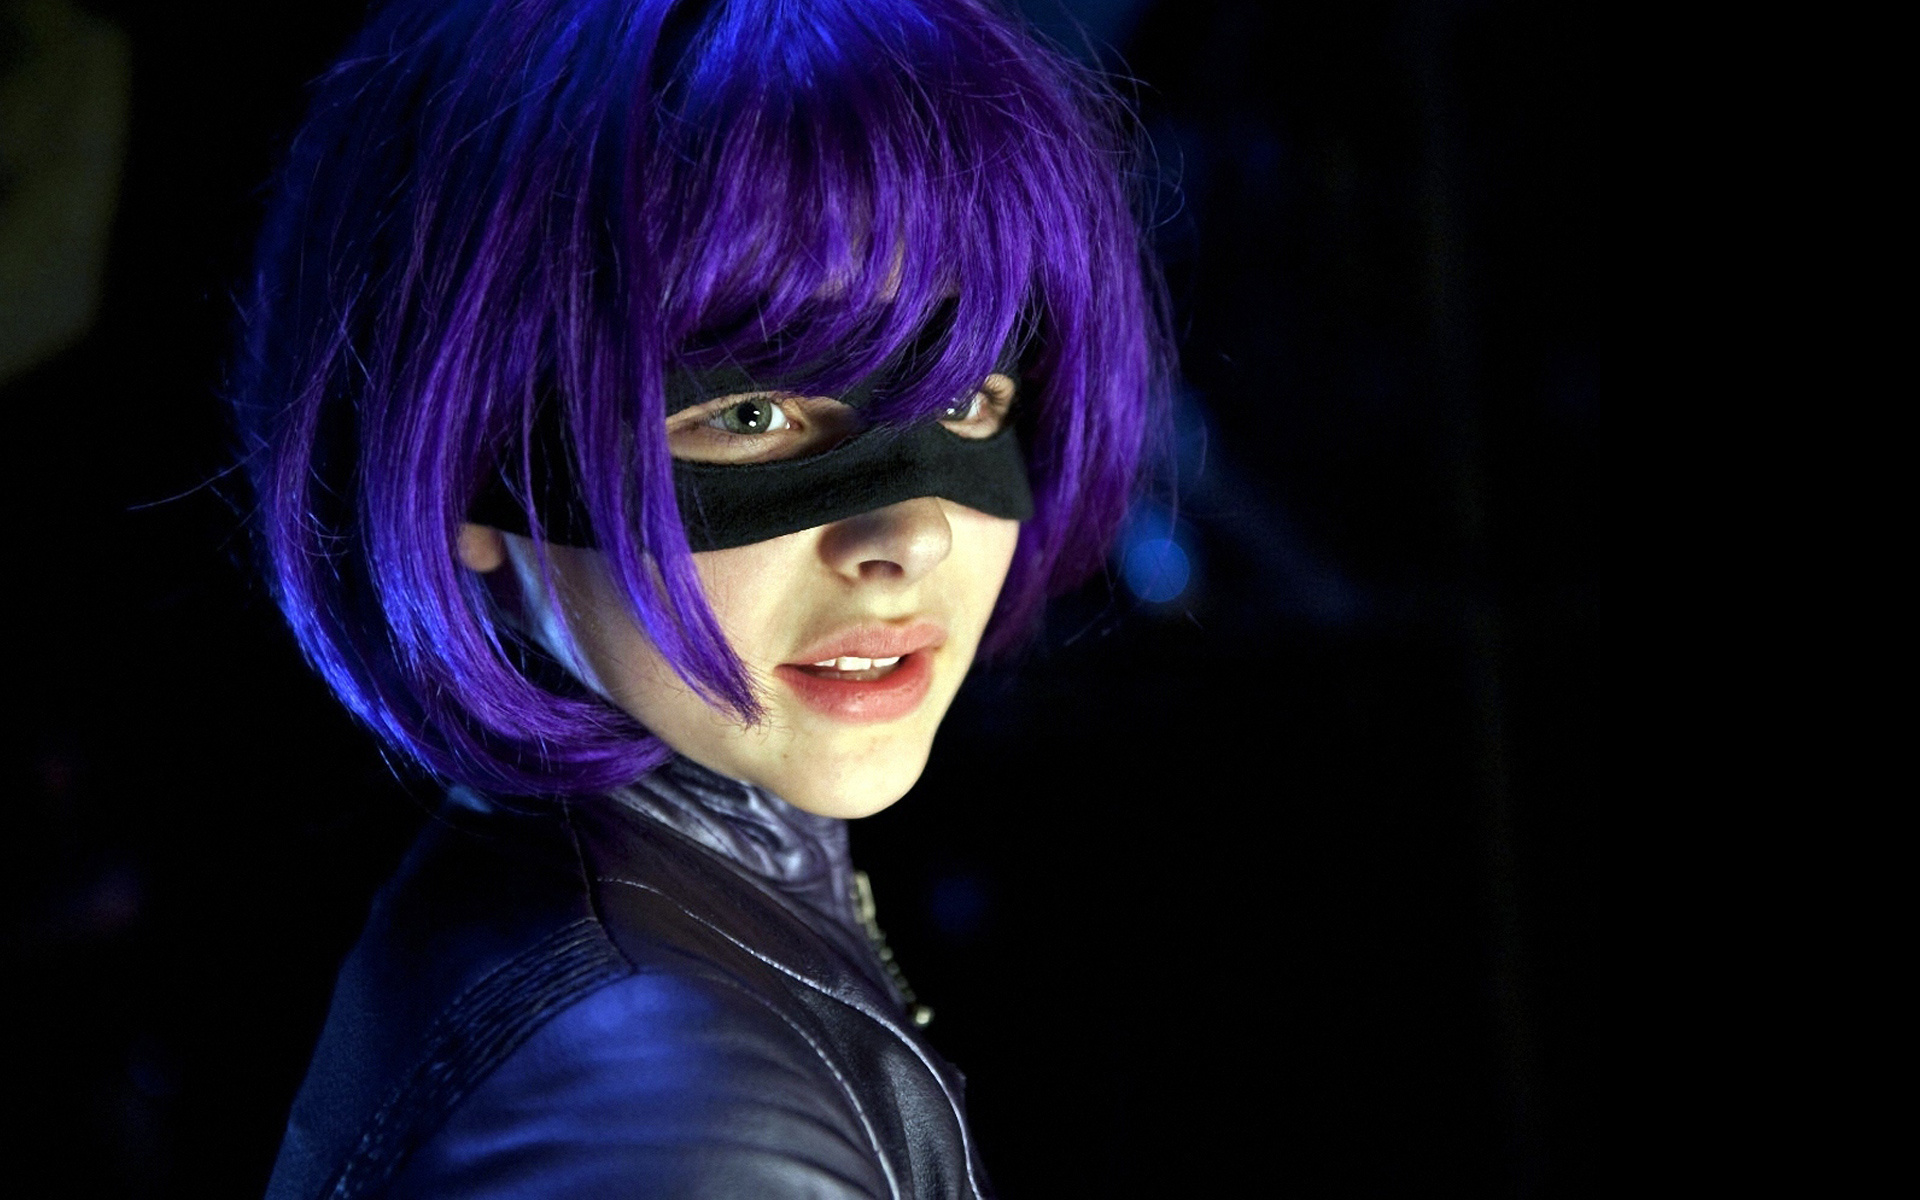 Kick-Ass: A highly skilled young assassin trained by her father. 1920x1200 HD Wallpaper.